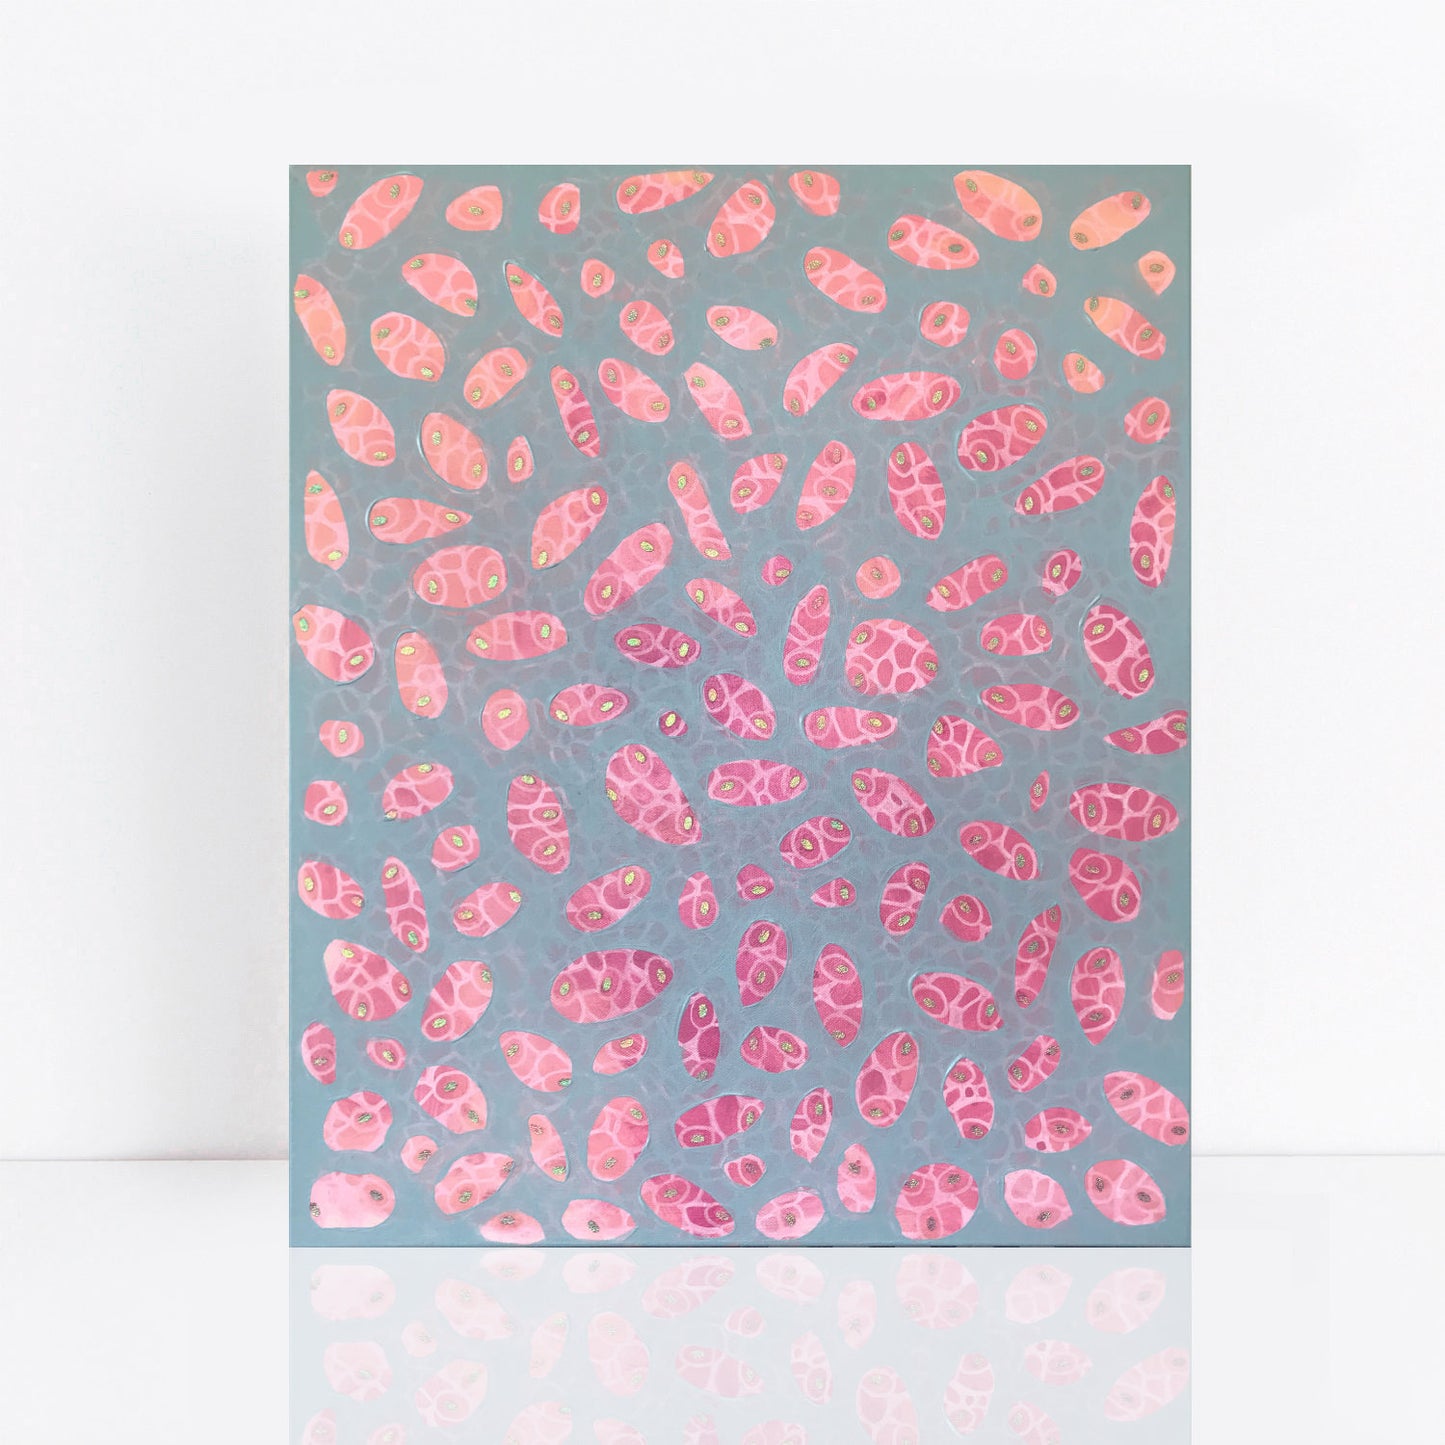 Soft blue grey and pink abstract painting with organic shapes